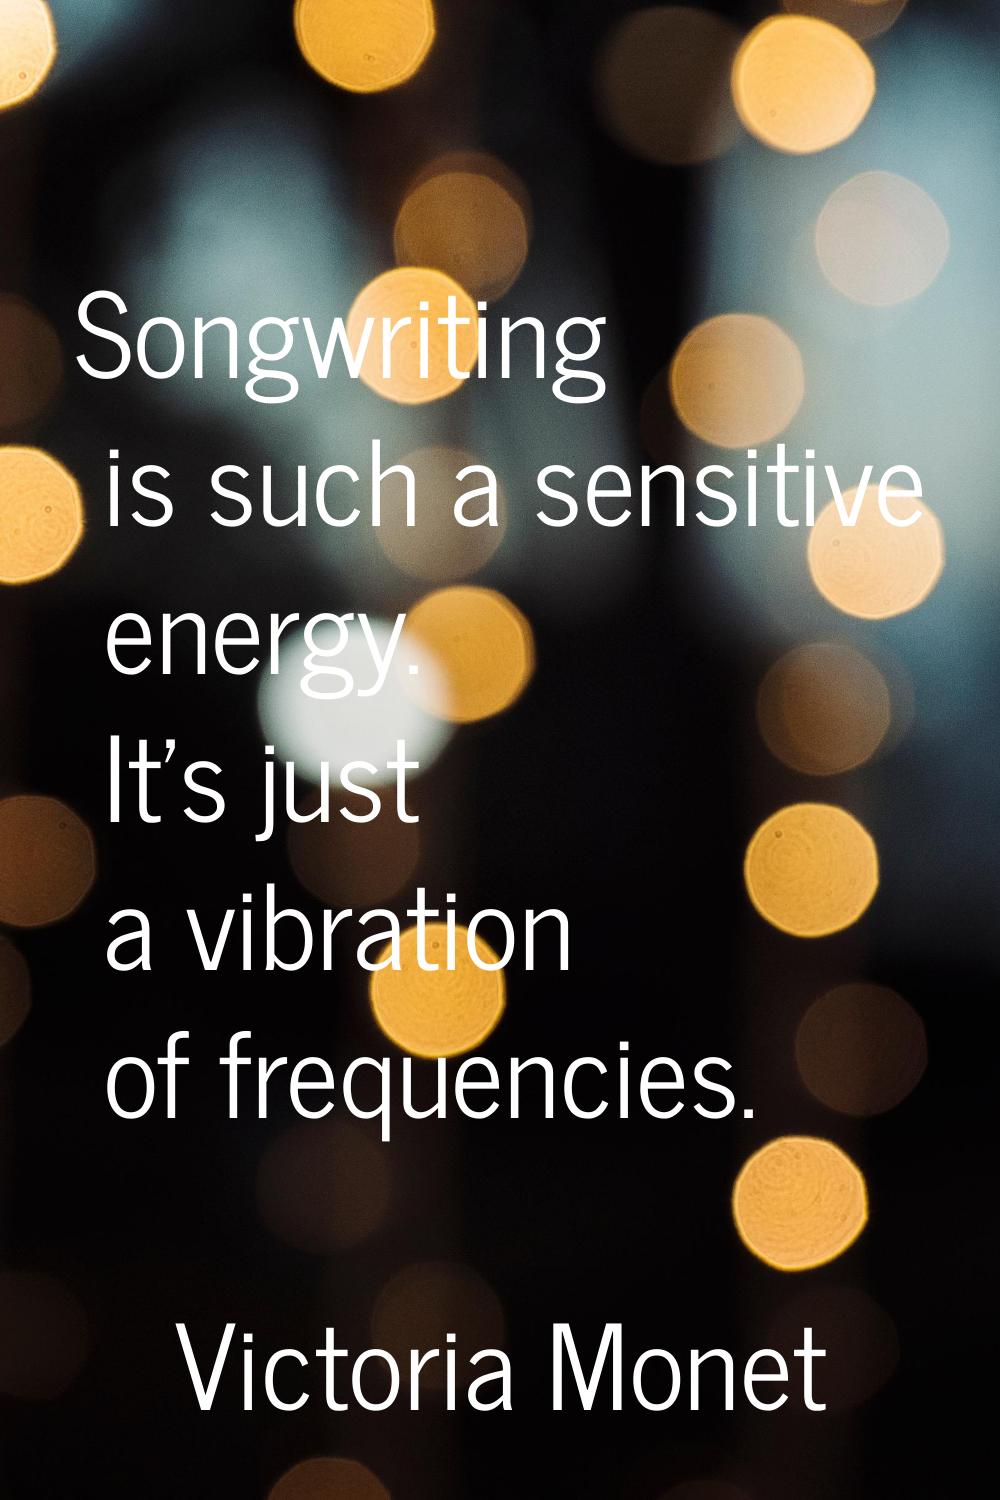 Songwriting is such a sensitive energy. It's just a vibration of frequencies.